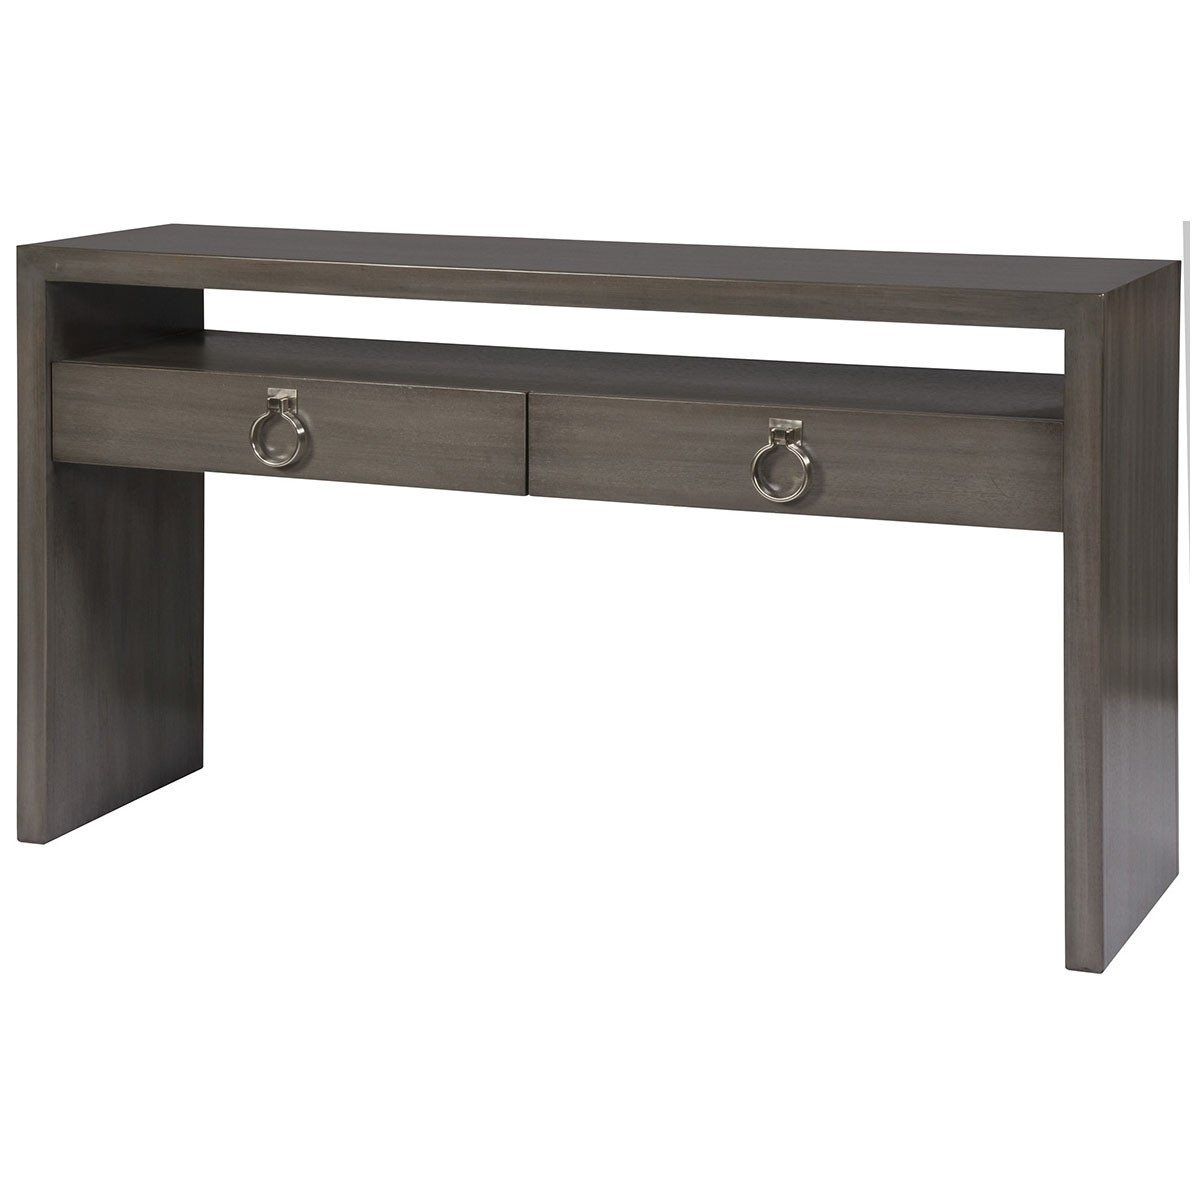 Vanguard Furniture Margo Console | Products | Furniture, Console Within Parsons Concrete Top &amp; Elm Base 48x16 Console Tables (View 9 of 20)